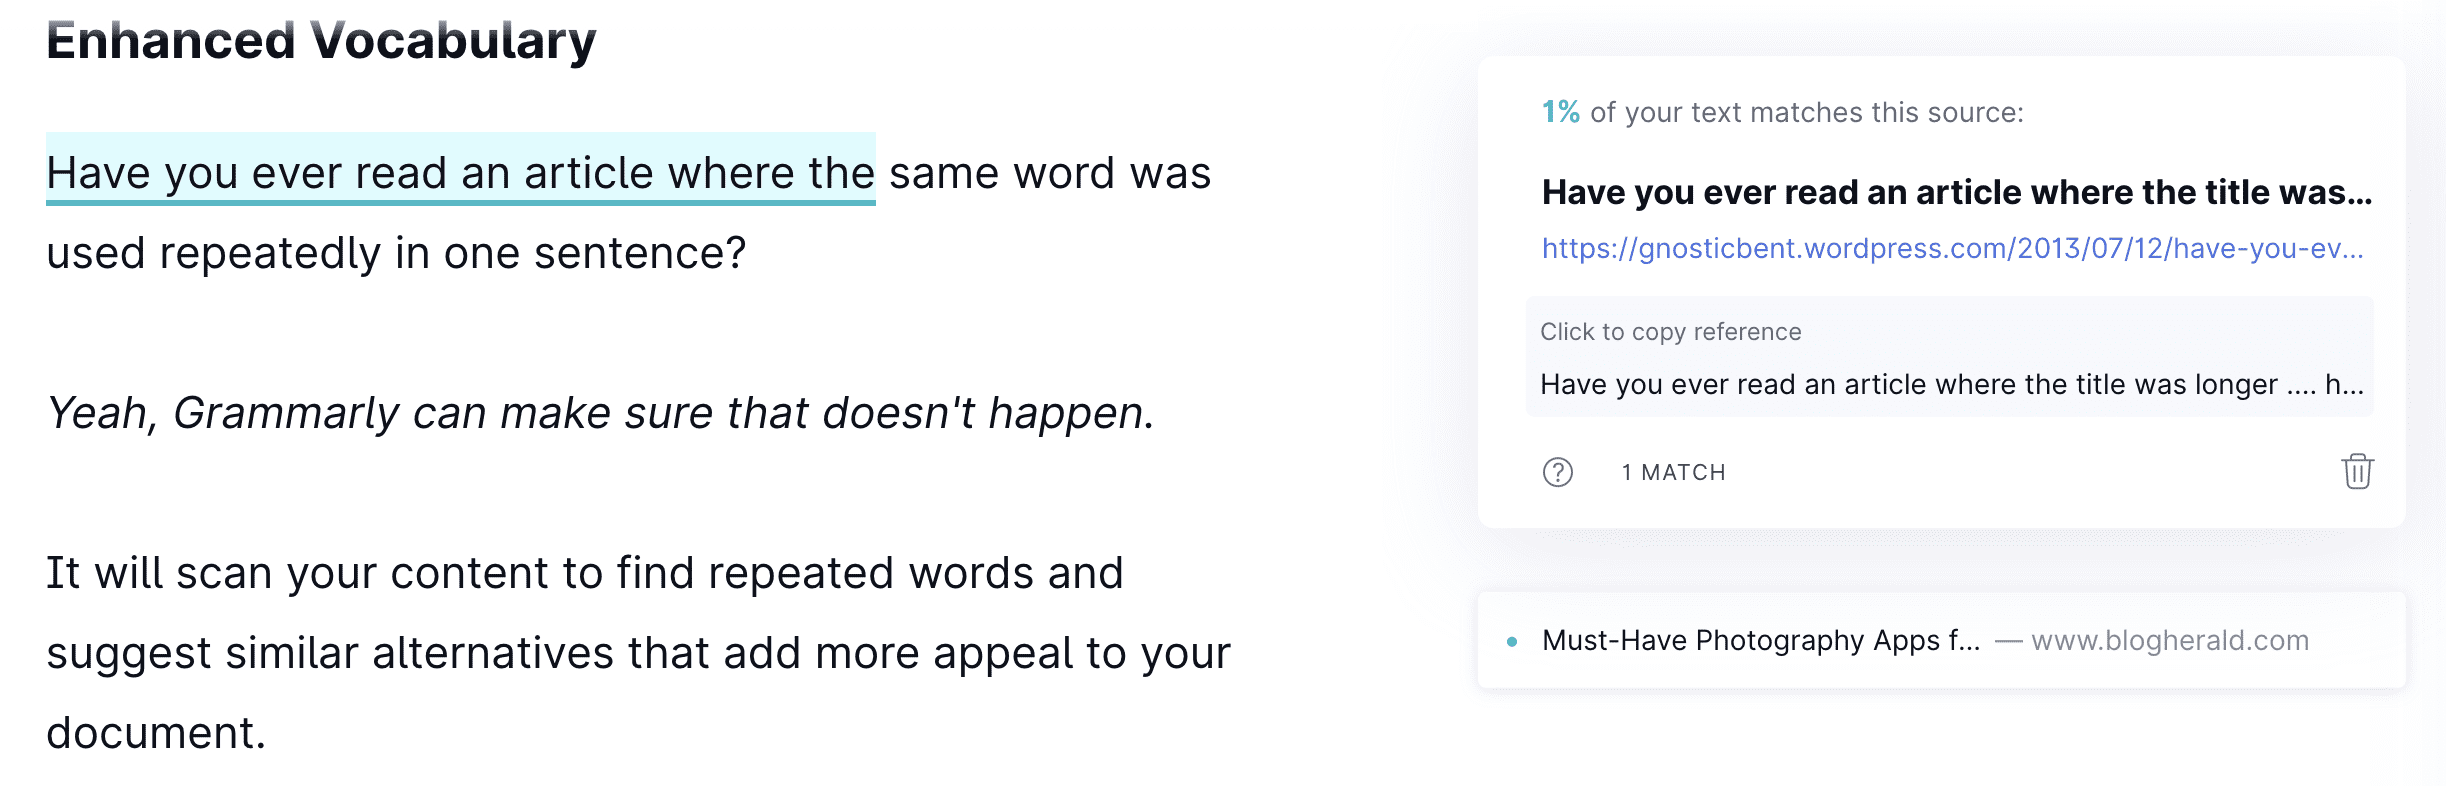 Grammarly premium offers this feature to its customers and helps give them peace of mind when publishing their work.